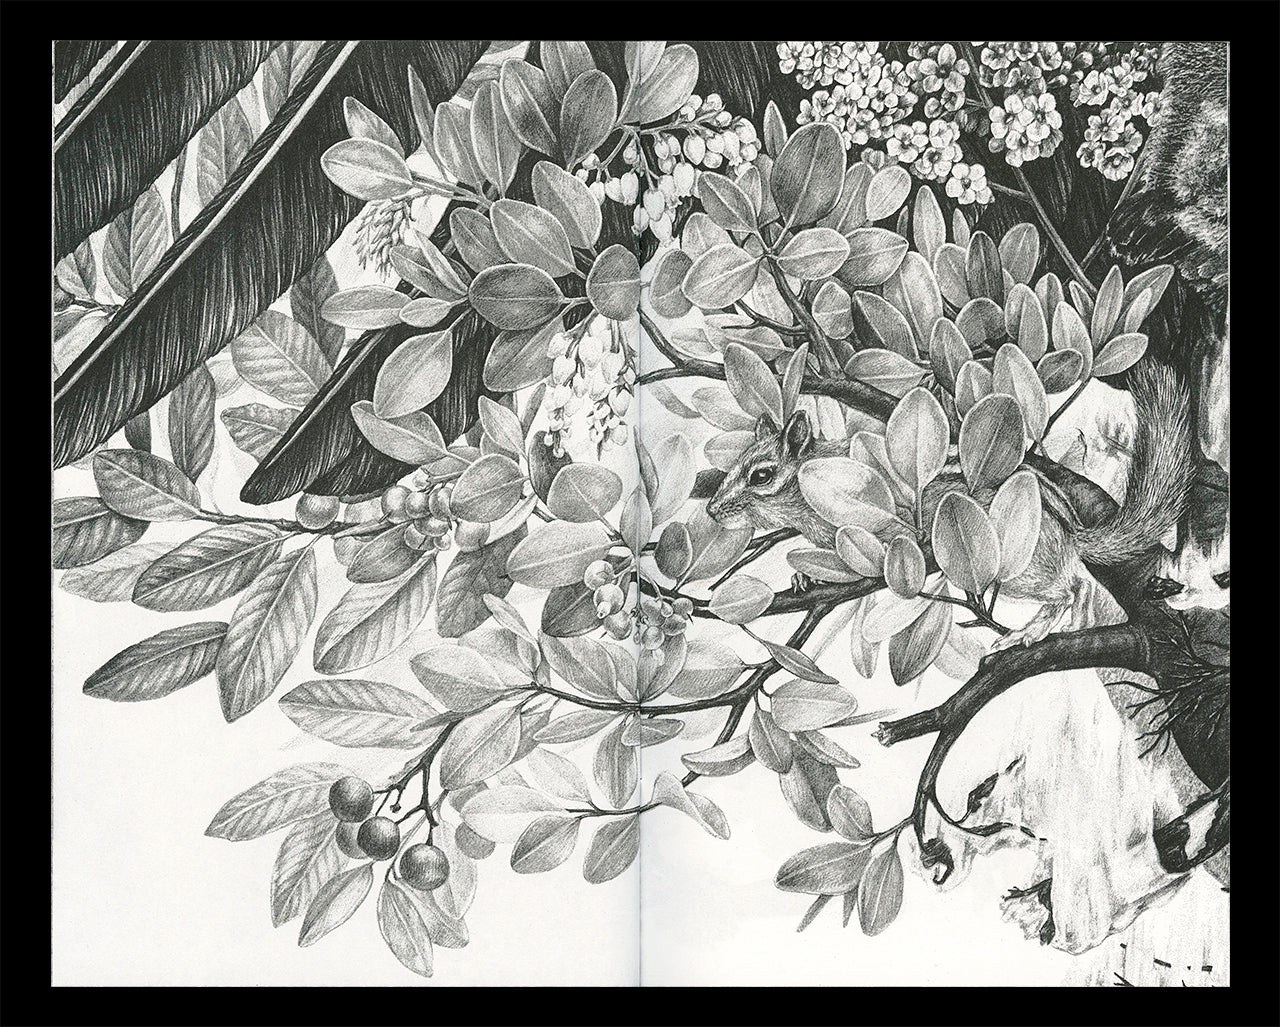 Interior spread of Zoe Keller's zine "Drawings" showing a graphite drawing of a chipmunk in a tree